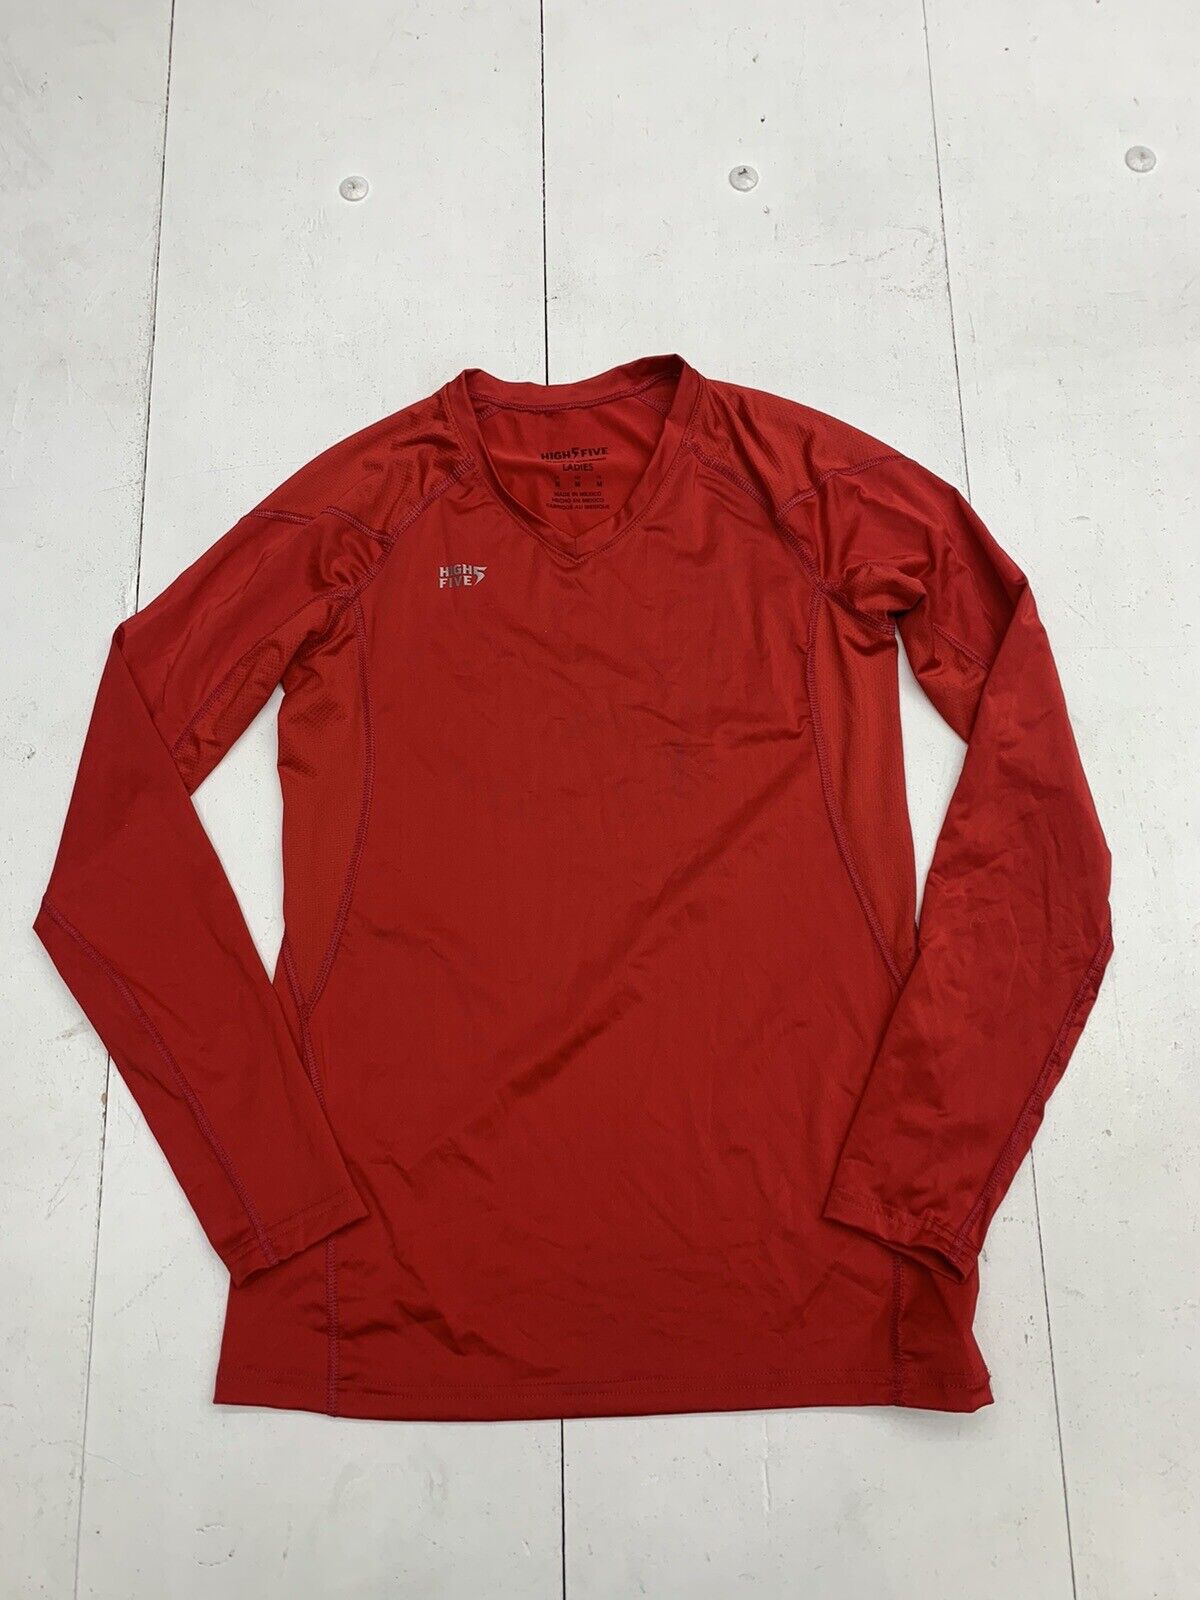 High Five Womens Red Long Sleeve Athletic Shirt Size Medium